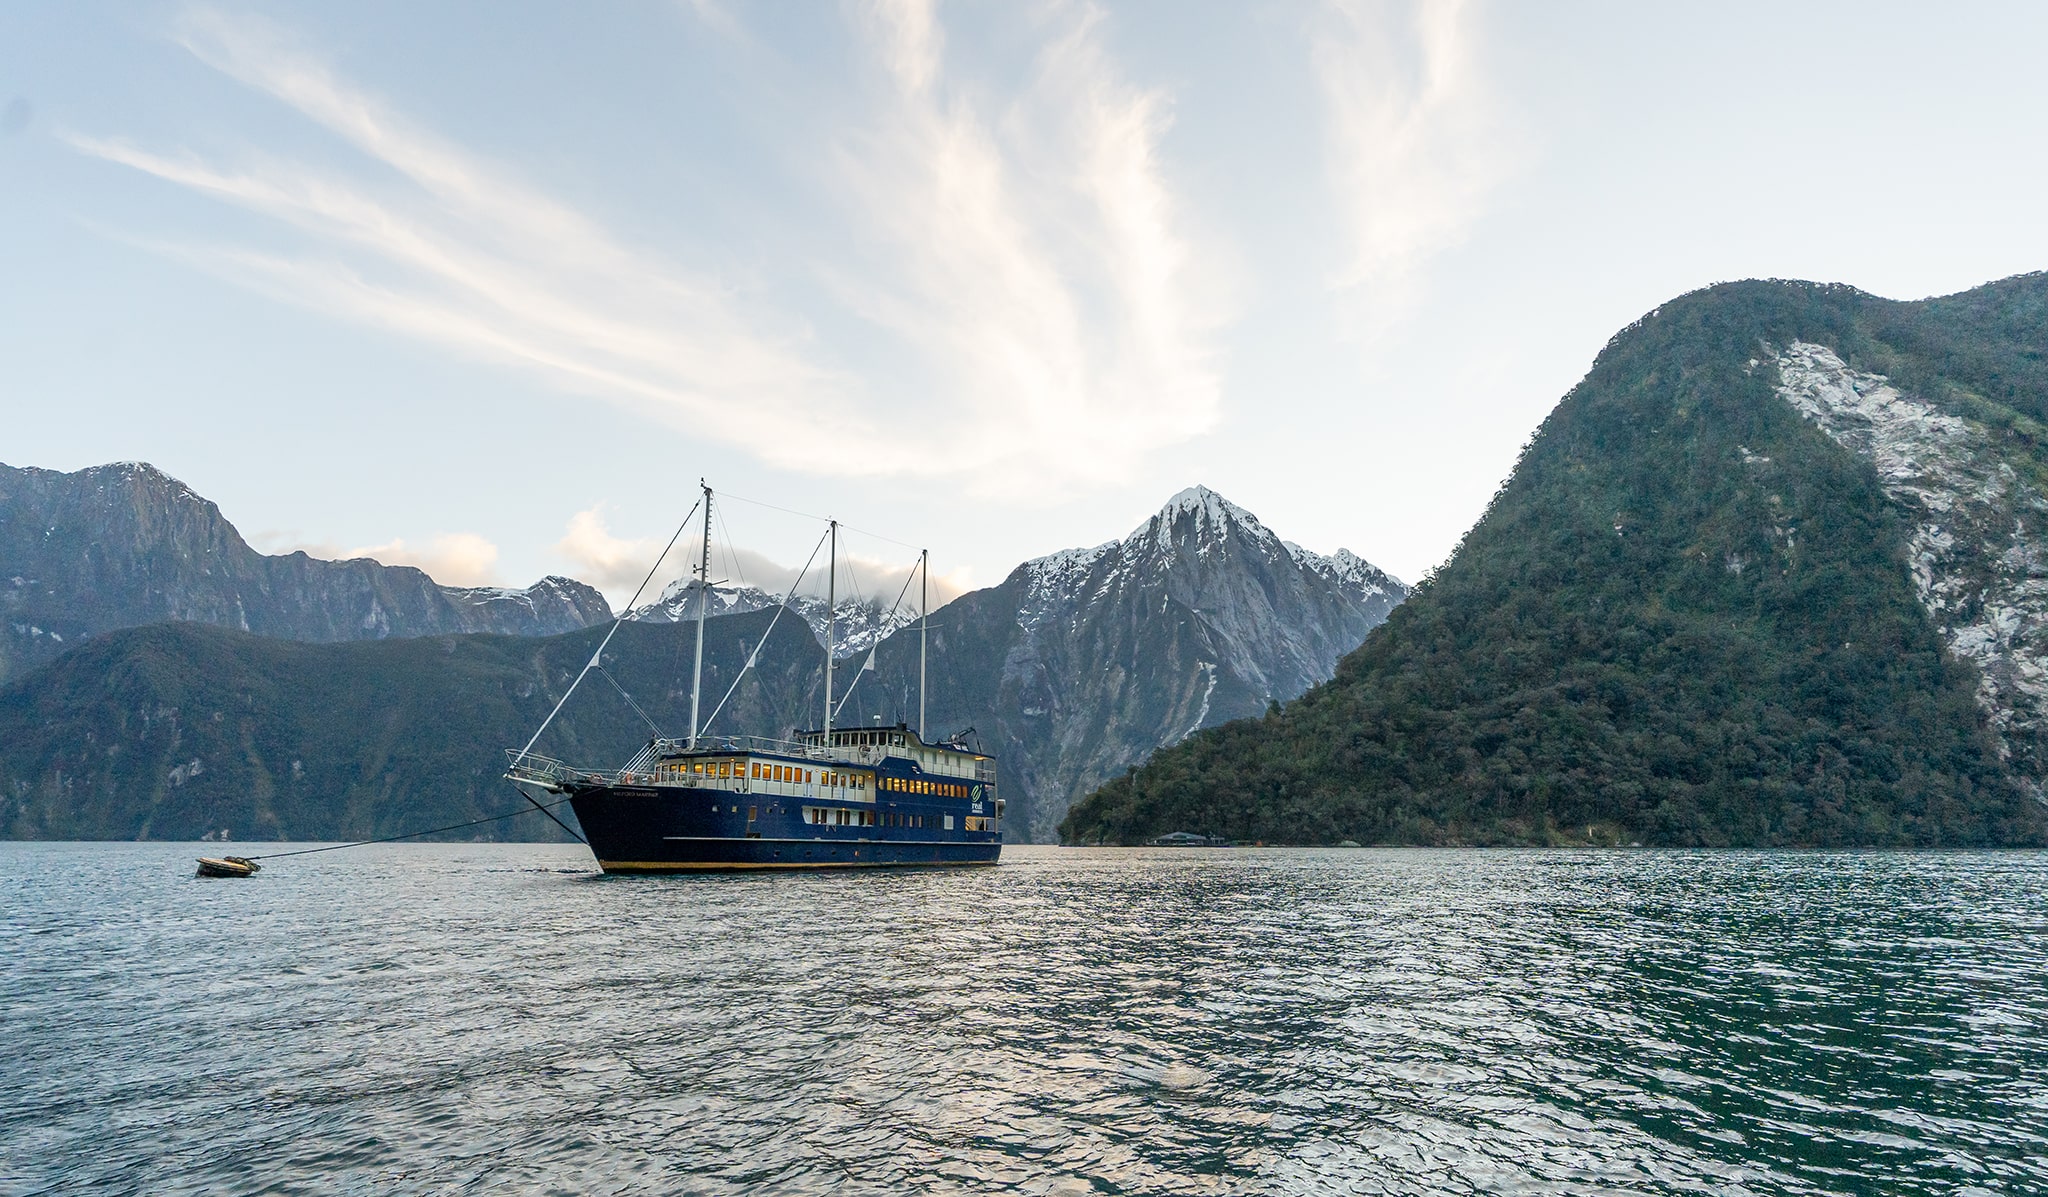 Boat moored in Milford Sound for the night